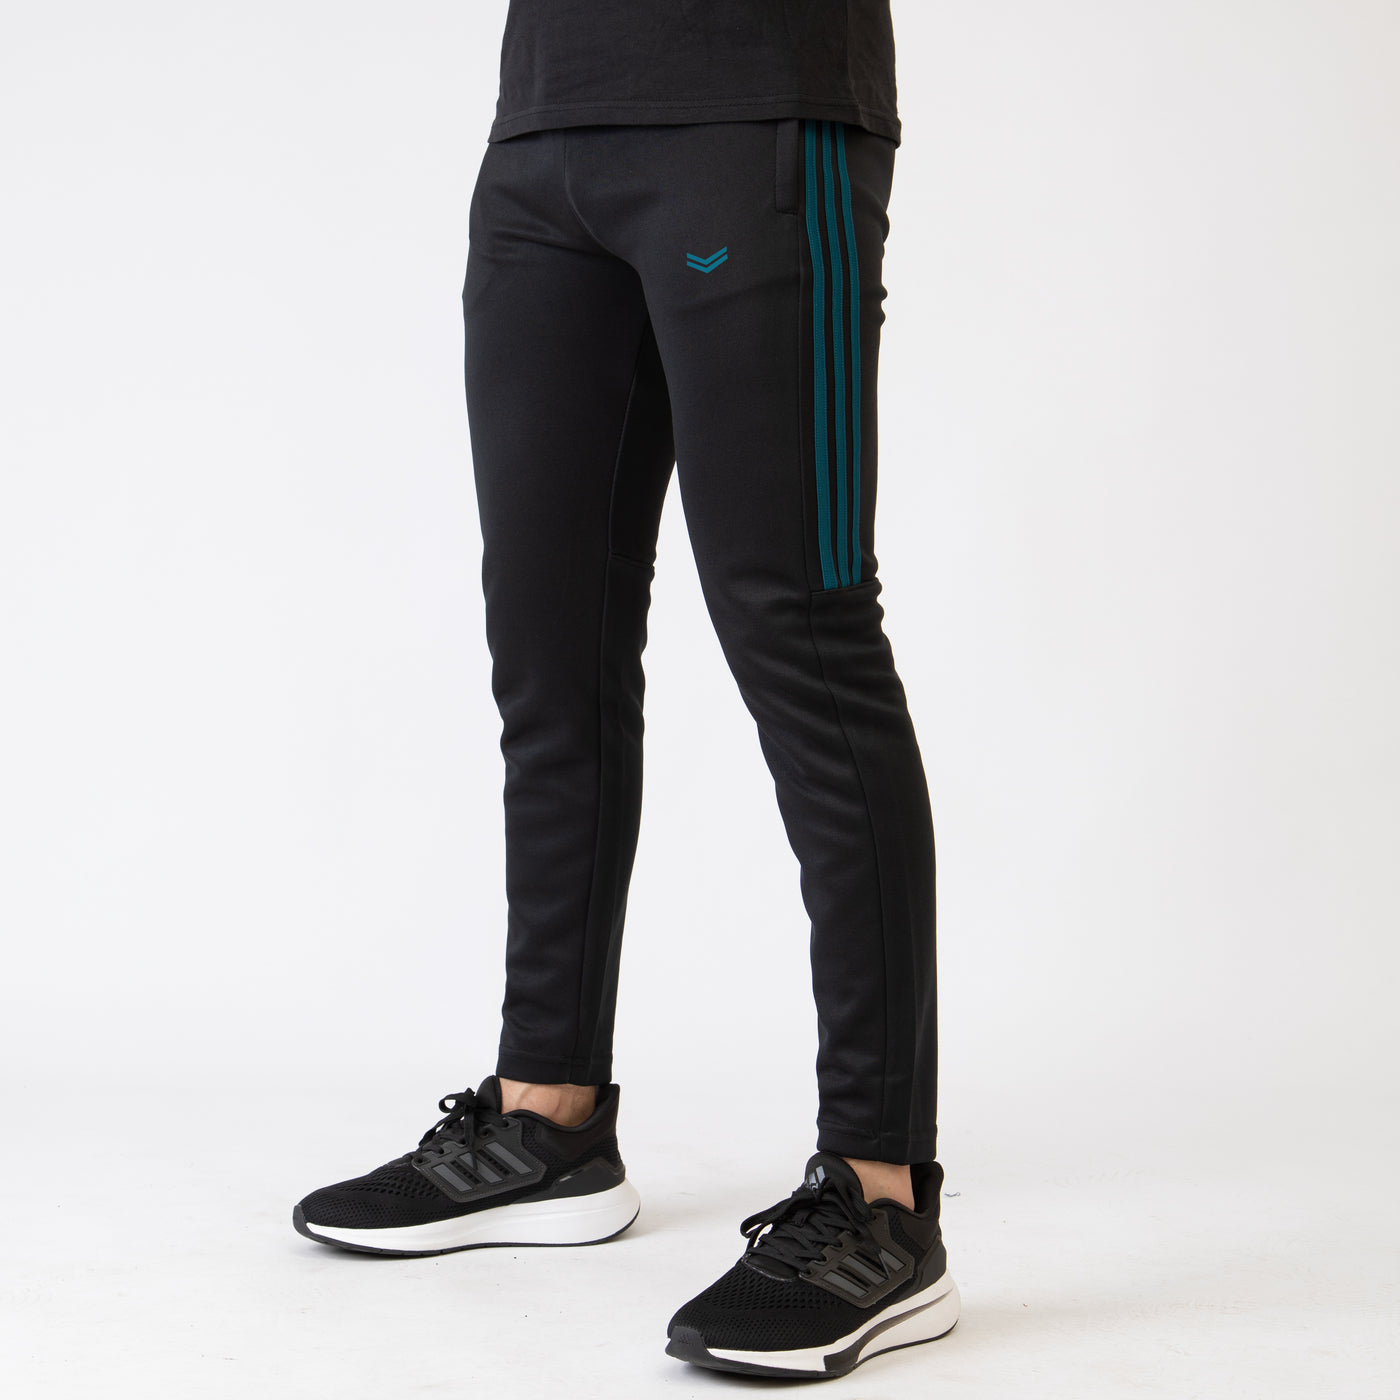 Black Quick Dry Bottoms With Short Three Teal Stripes